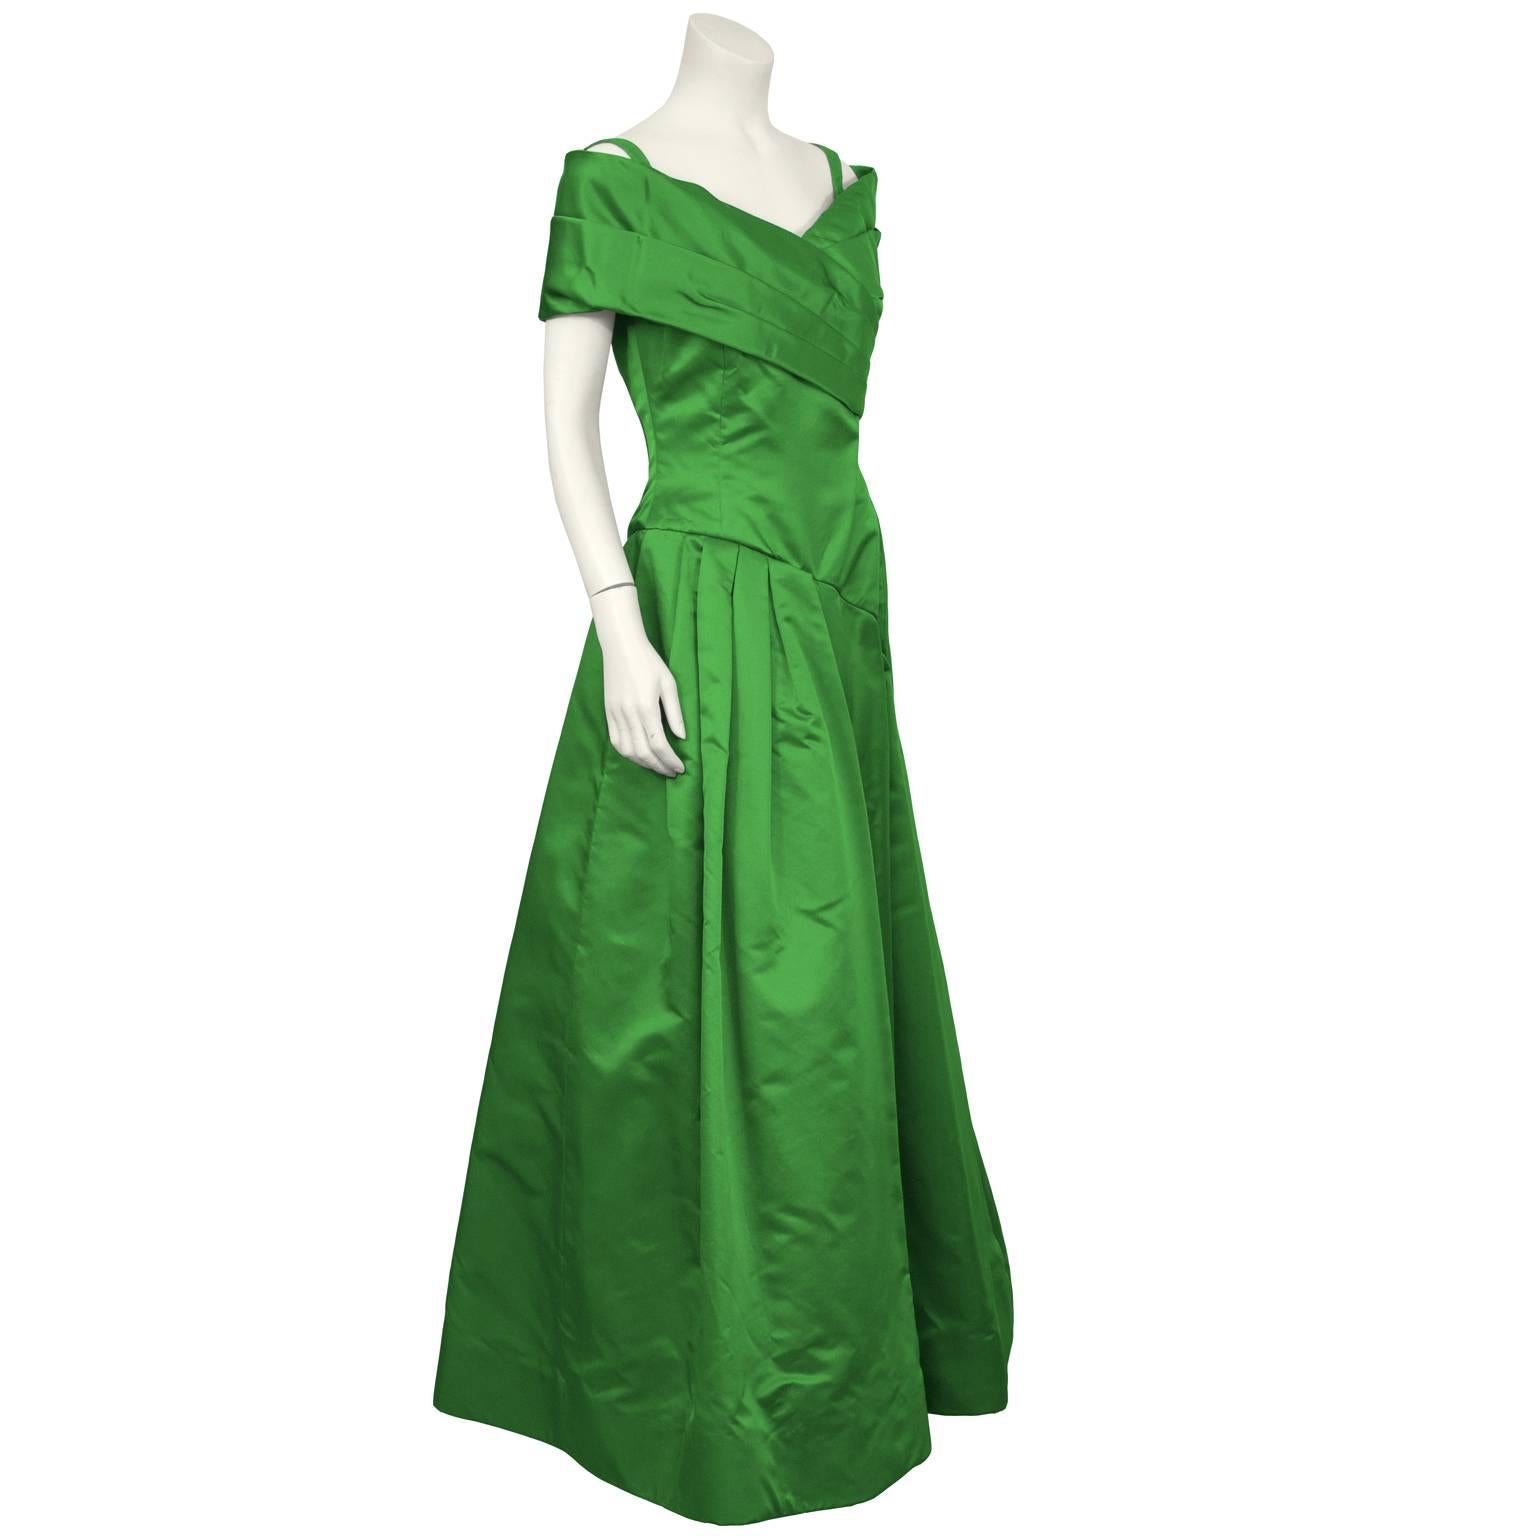 Dramatic 1980's emerald green satin gown by Arnold Scaasi. The dress has a pleated off the shoulder detail that wraps around the front bust. The asymmetrical waistline has gathering on the right hip and the full skirt falls to the ground. Thin